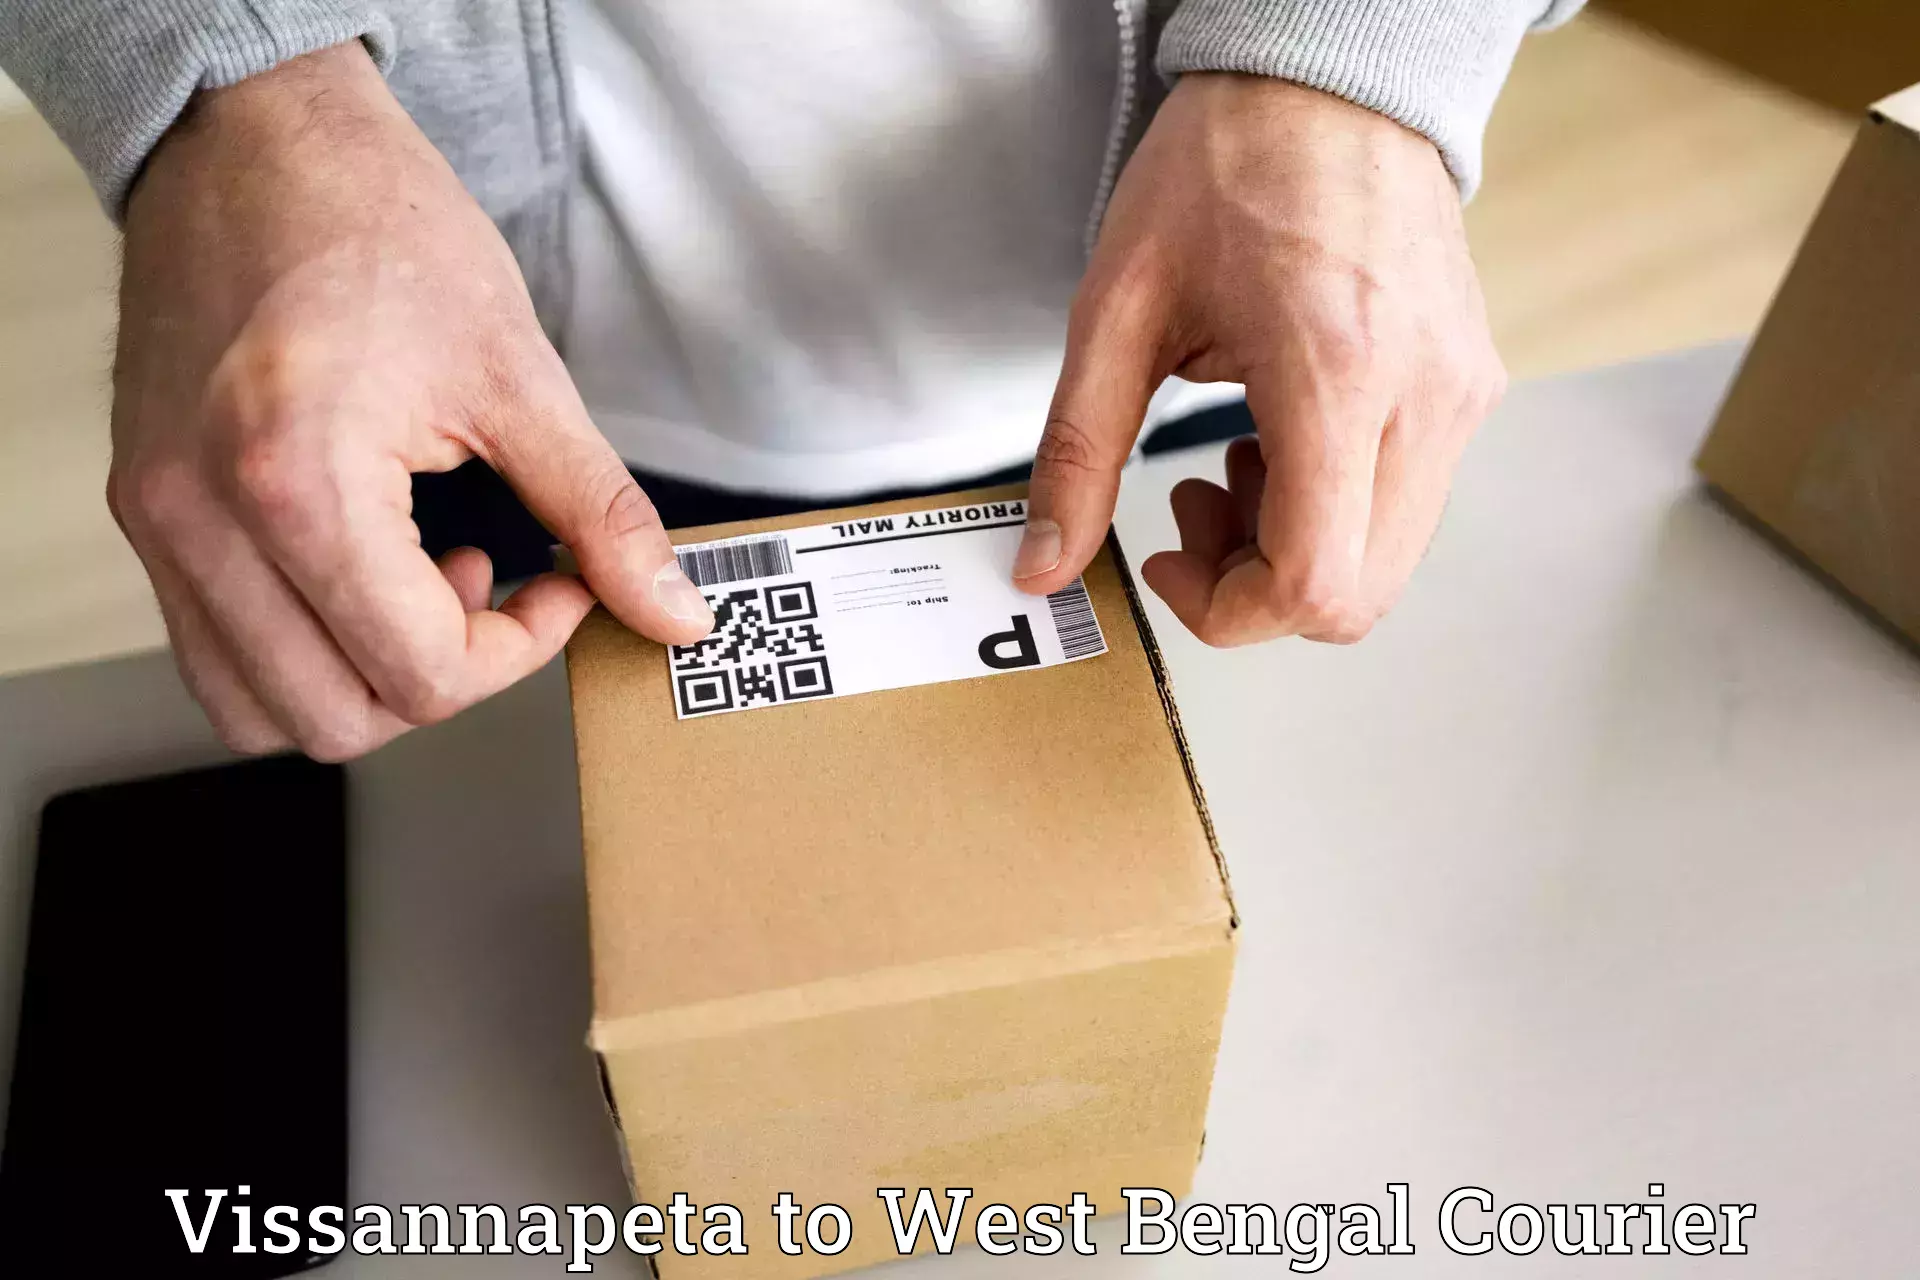 Express delivery network Vissannapeta to West Bengal